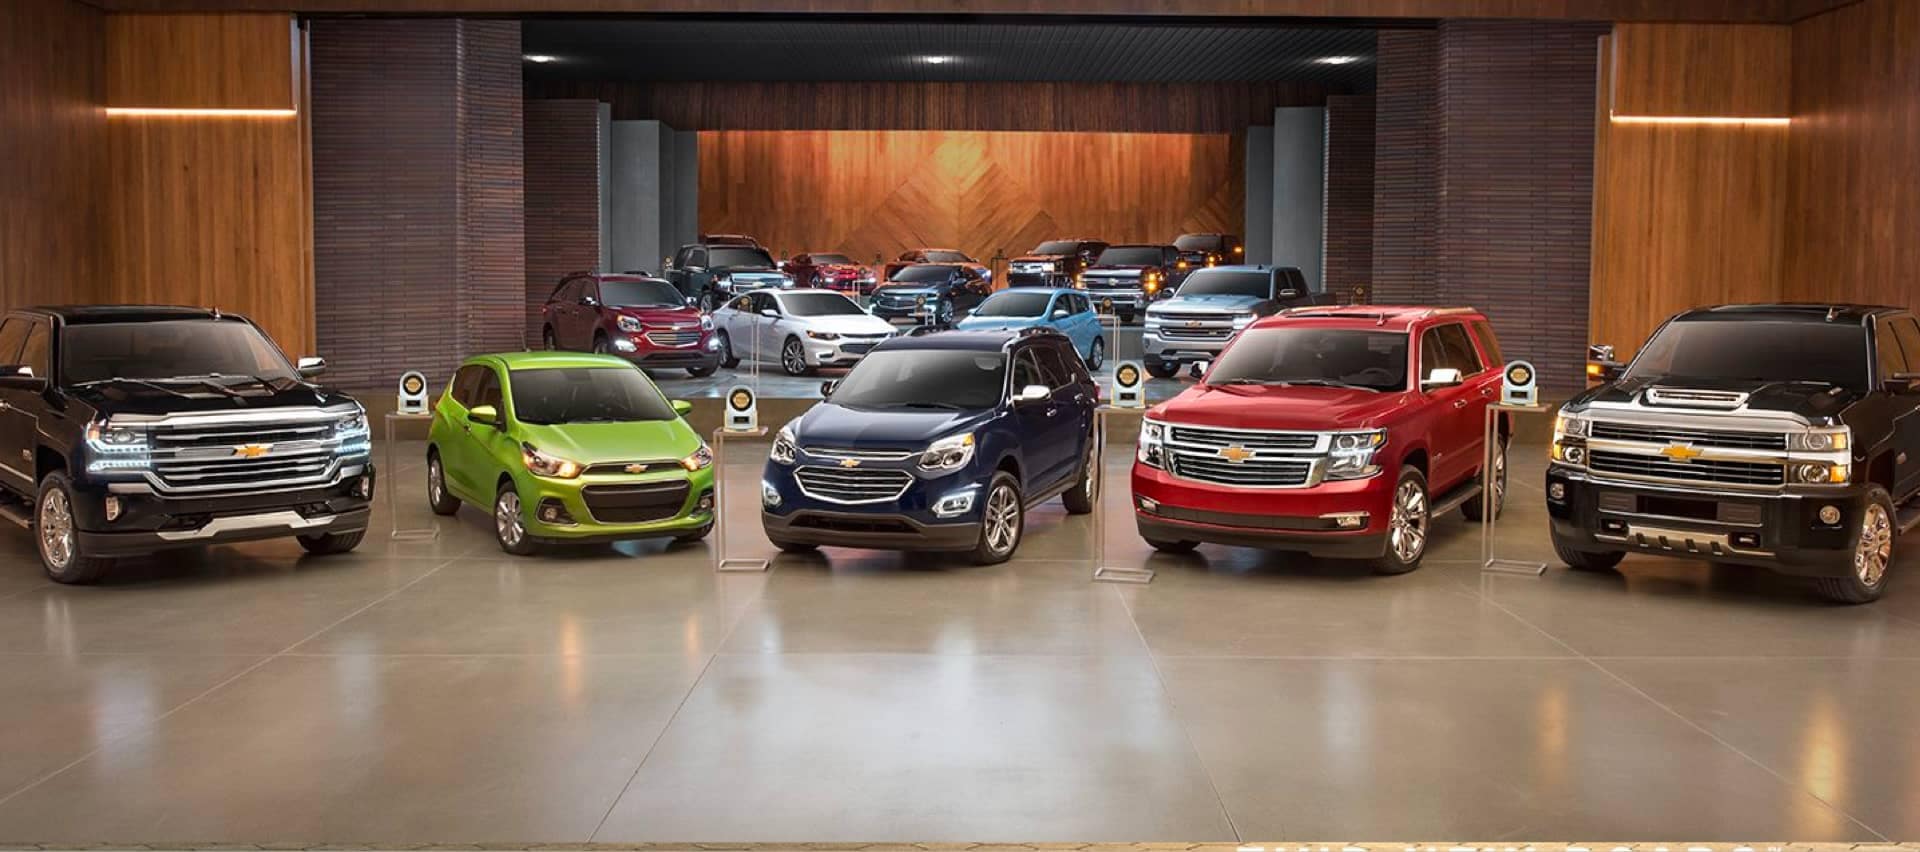 The 2020 Chevrolet model lineup comprised of their most popular vehicles An exterior shot of a Chevrolet dealership at night.